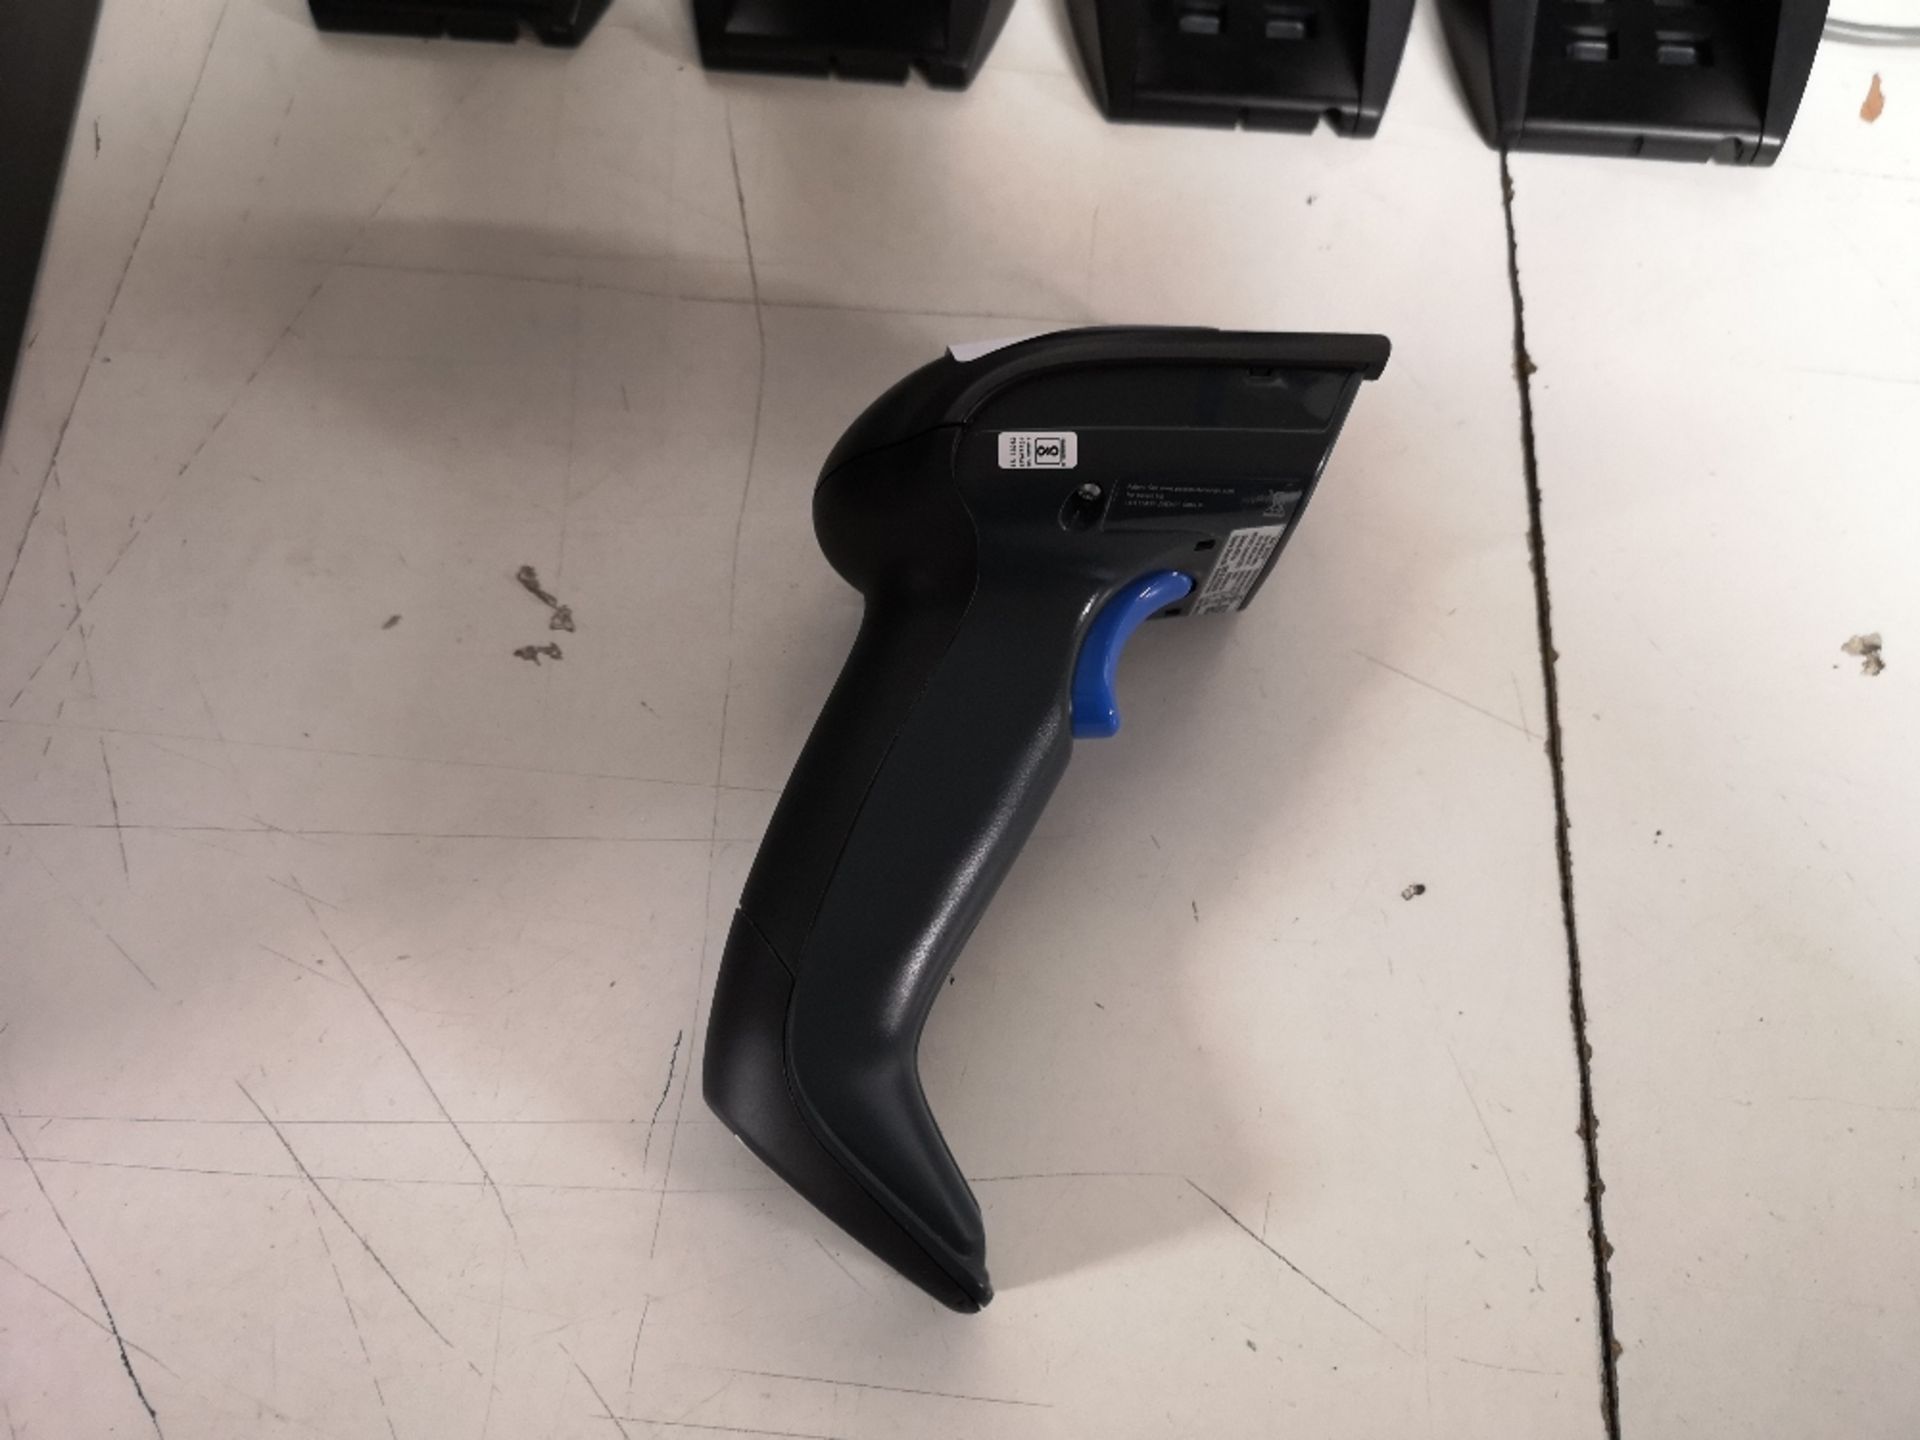 (4) Datalogic Wireless Barcode Scanners Model: Gryphon Type: GM4400-BK-443 Mhz - Image 2 of 5